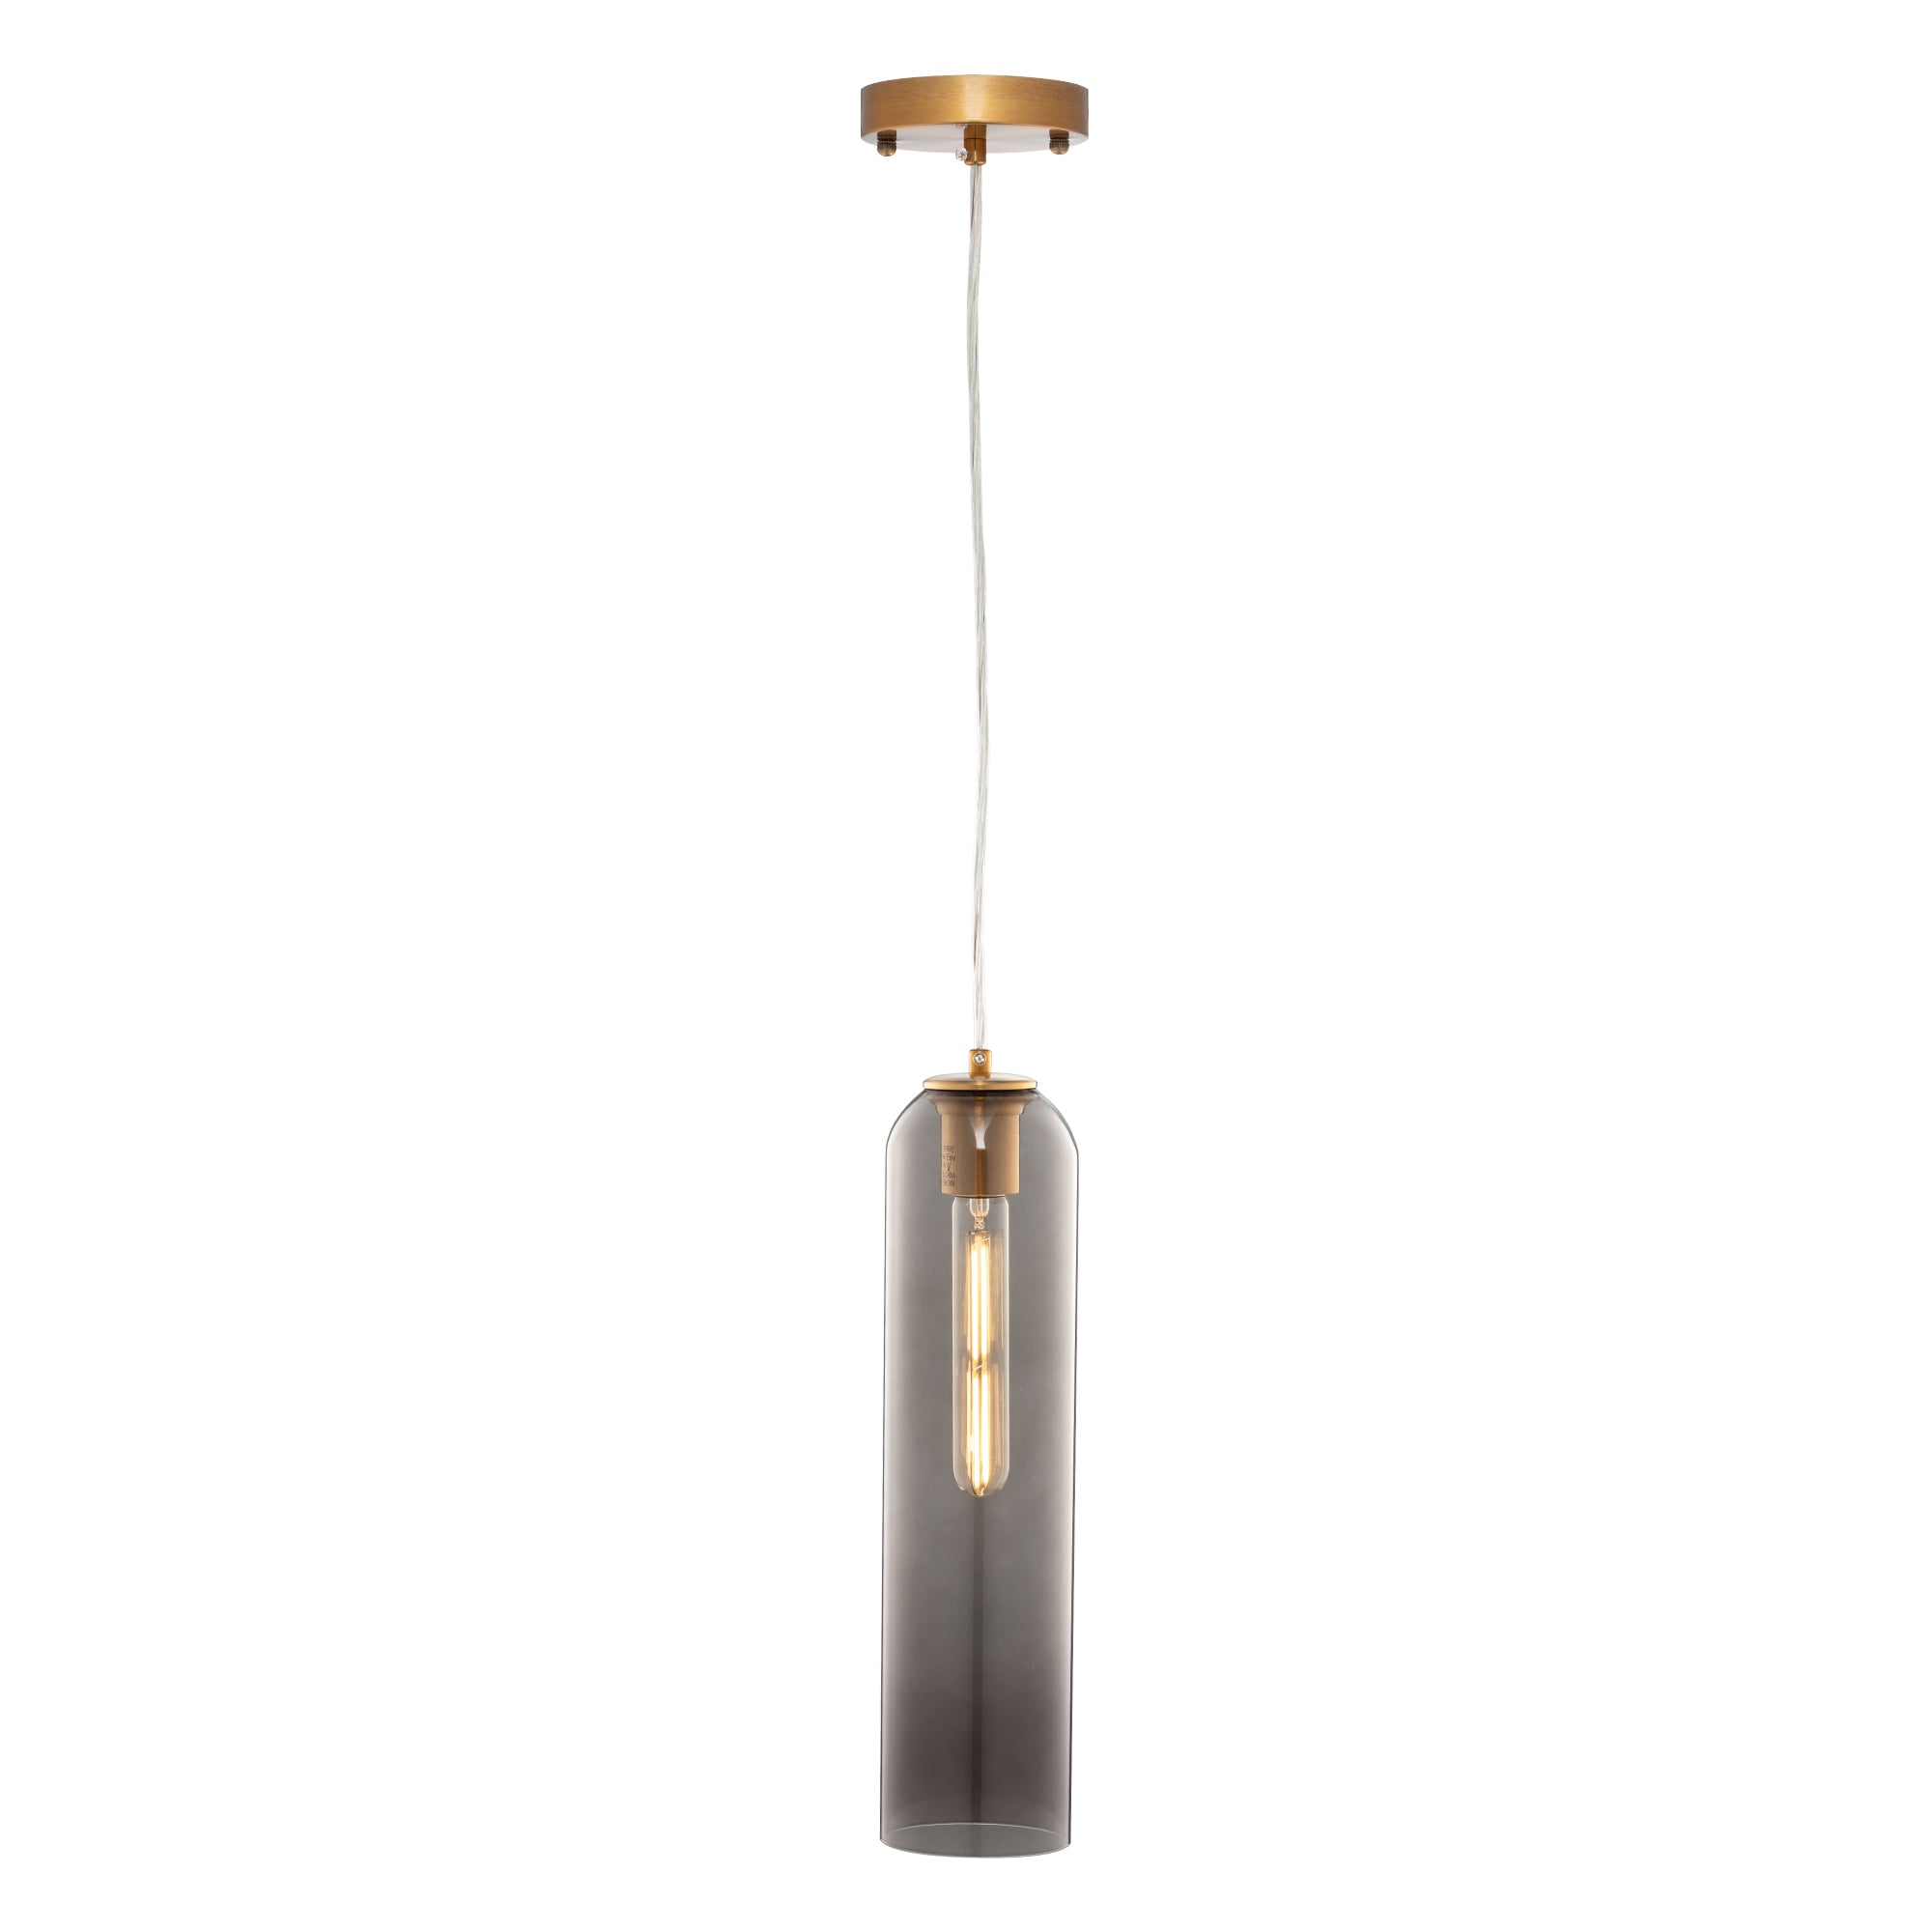 Hydra Pendant Light Collection features a 1-light pendant with a stunning design statement. Because of its thin width, it’s perfect for illuminating a compact entryway or lining a few up above the kitchen island to case a warm glow over morning meals. It looks incredible mounted in a series in the kitchen or hallway, or as an accent piece in the living room or bedroom to complement and brighten up your décor.